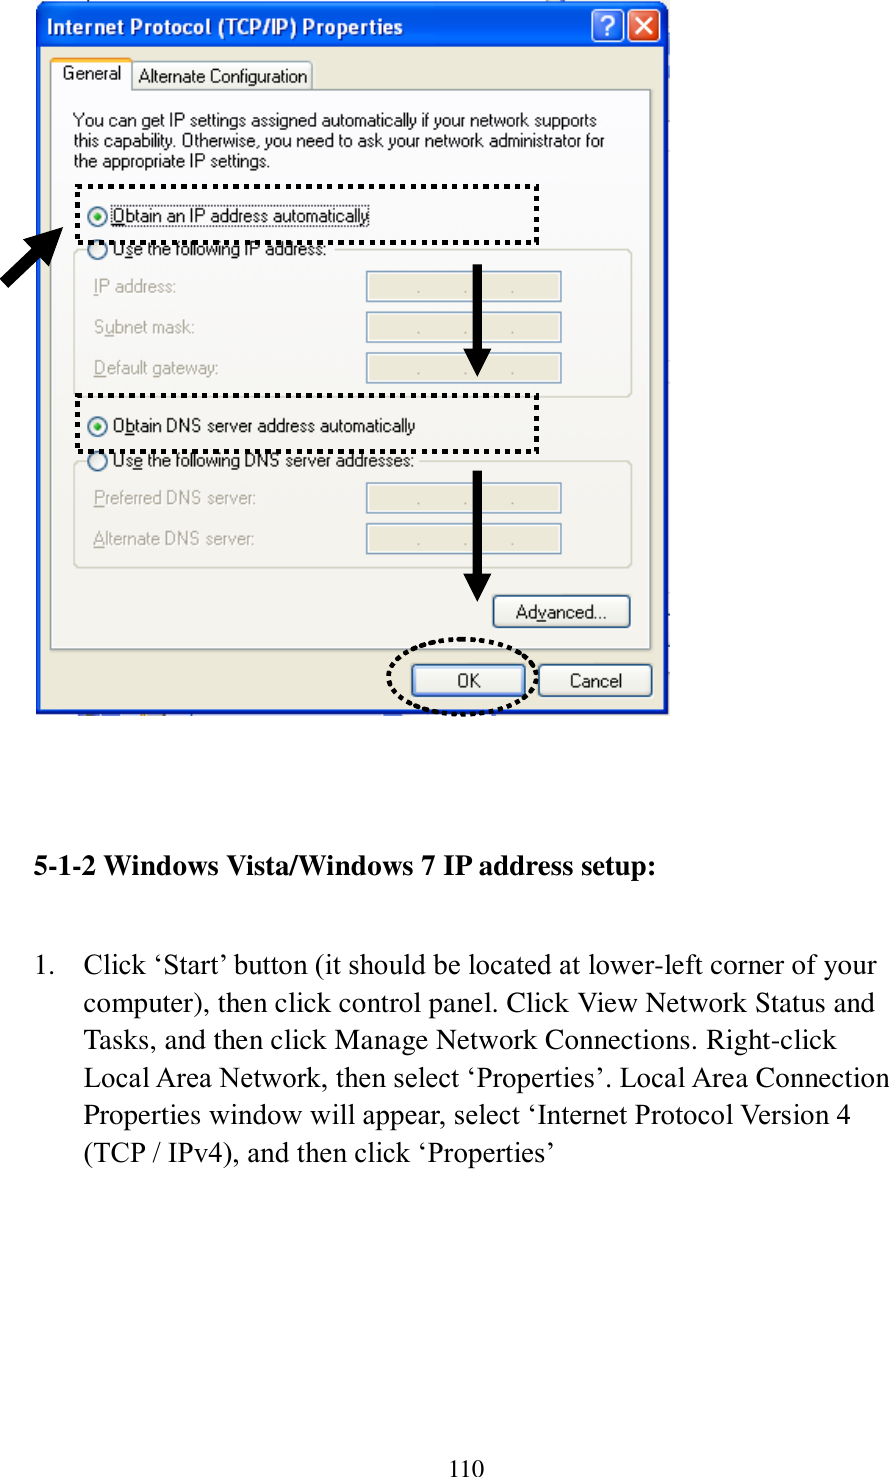 110     5-1-2 Windows Vista/Windows 7 IP address setup:  1. Click ‘Start’ button (it should be located at lower-left corner of your computer), then click control panel. Click View Network Status and Tasks, and then click Manage Network Connections. Right-click Local Area Network, then select ‘Properties’. Local Area Connection Properties window will appear, select ‘Internet Protocol Version 4 (TCP / IPv4), and then click ‘Properties’  